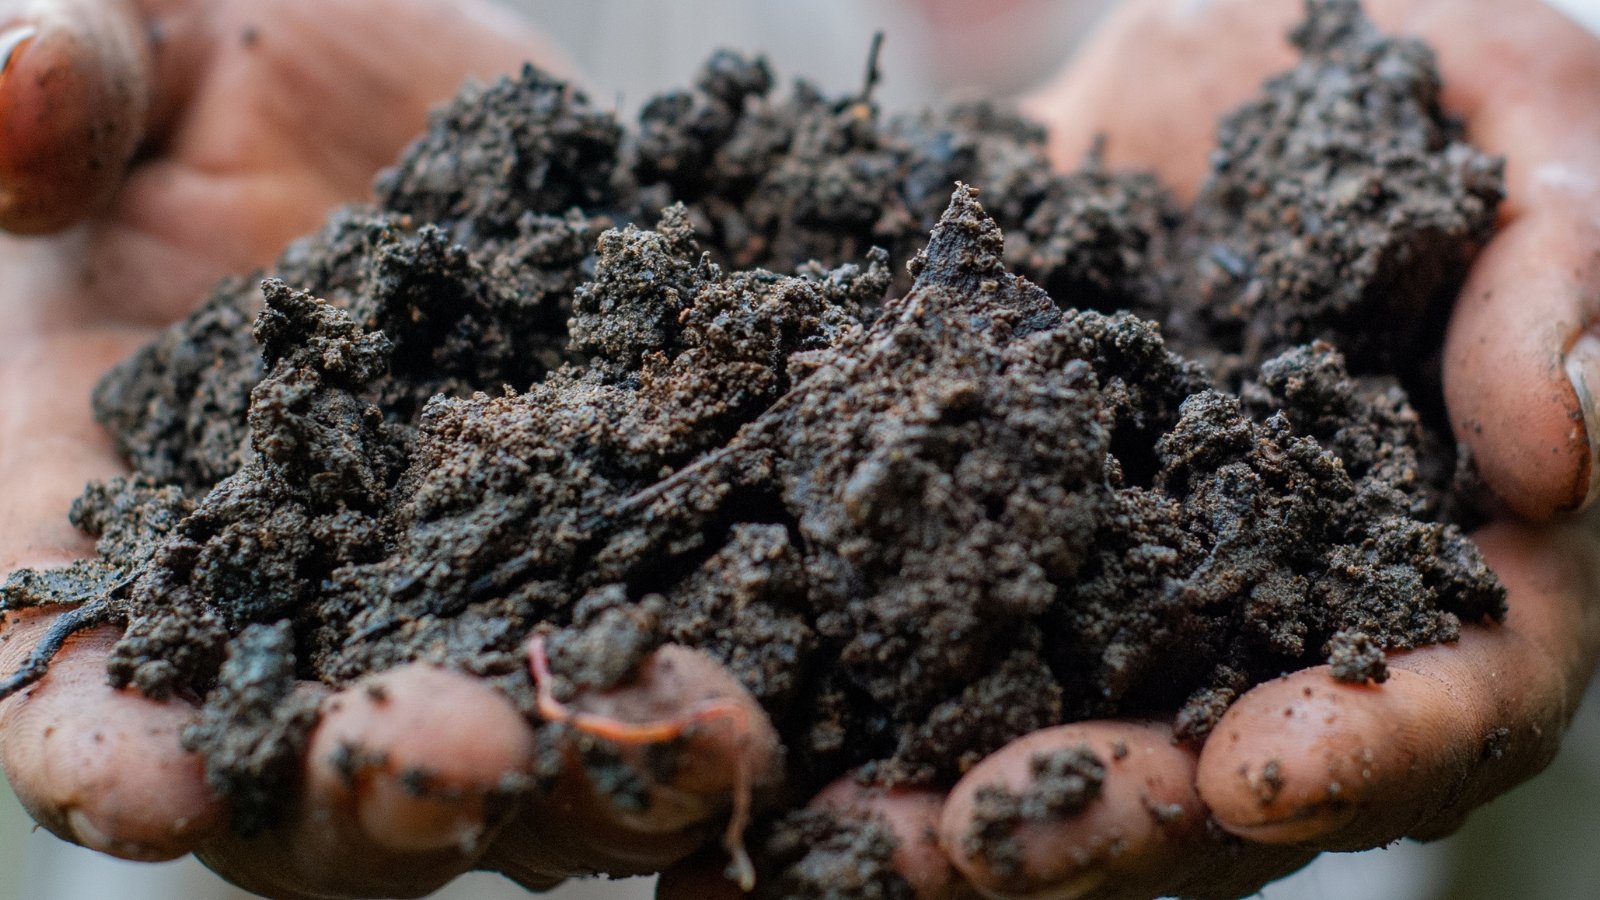 A close-up reveals hands coated in dirt, gently embracing rich, damp soil, nurturing potential life with its darkness and moisture, promising growth and vitality in its depths.